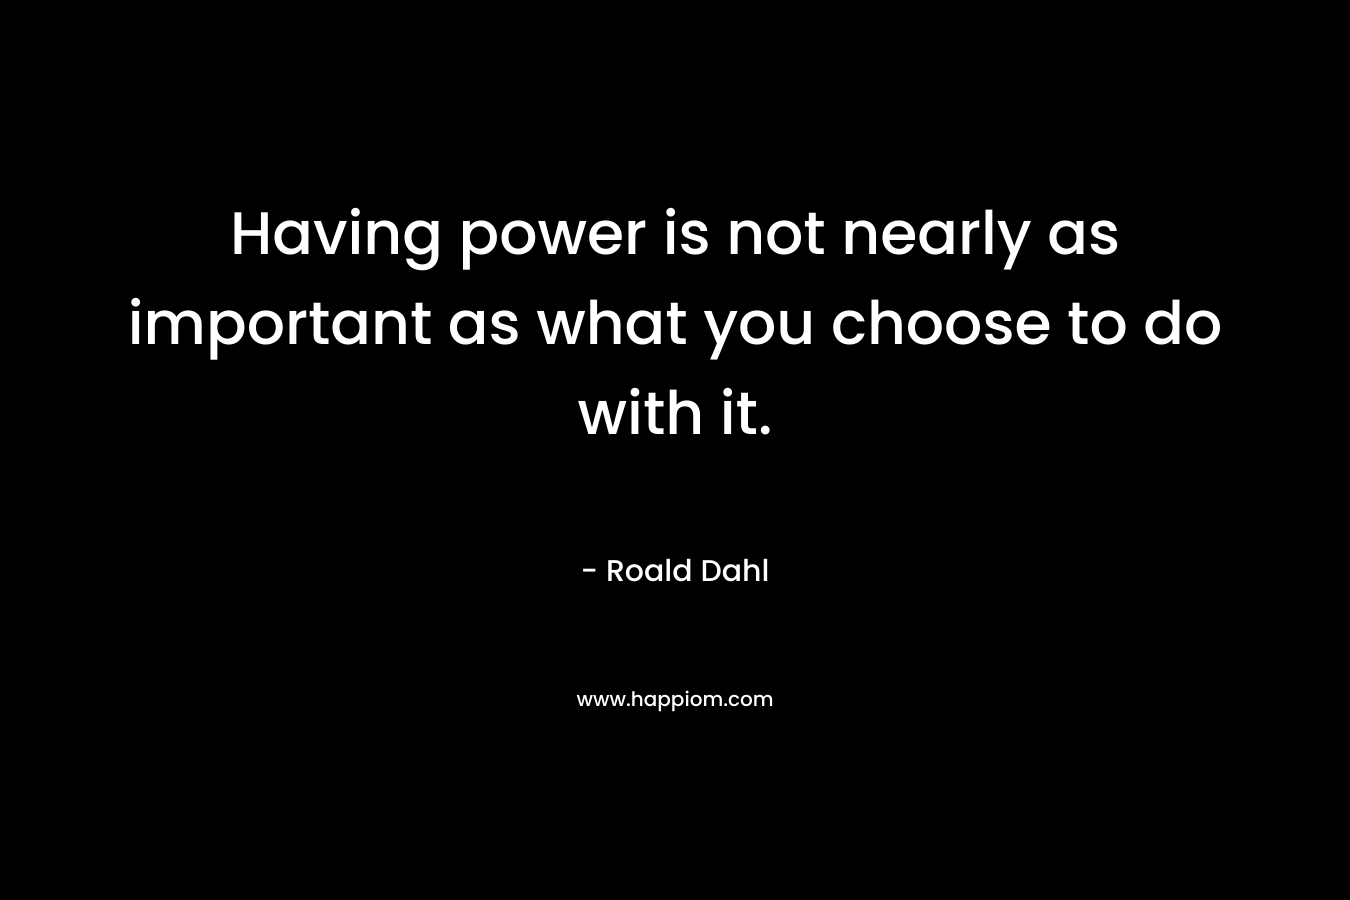 Having power is not nearly as important as what you choose to do with it. – Roald Dahl